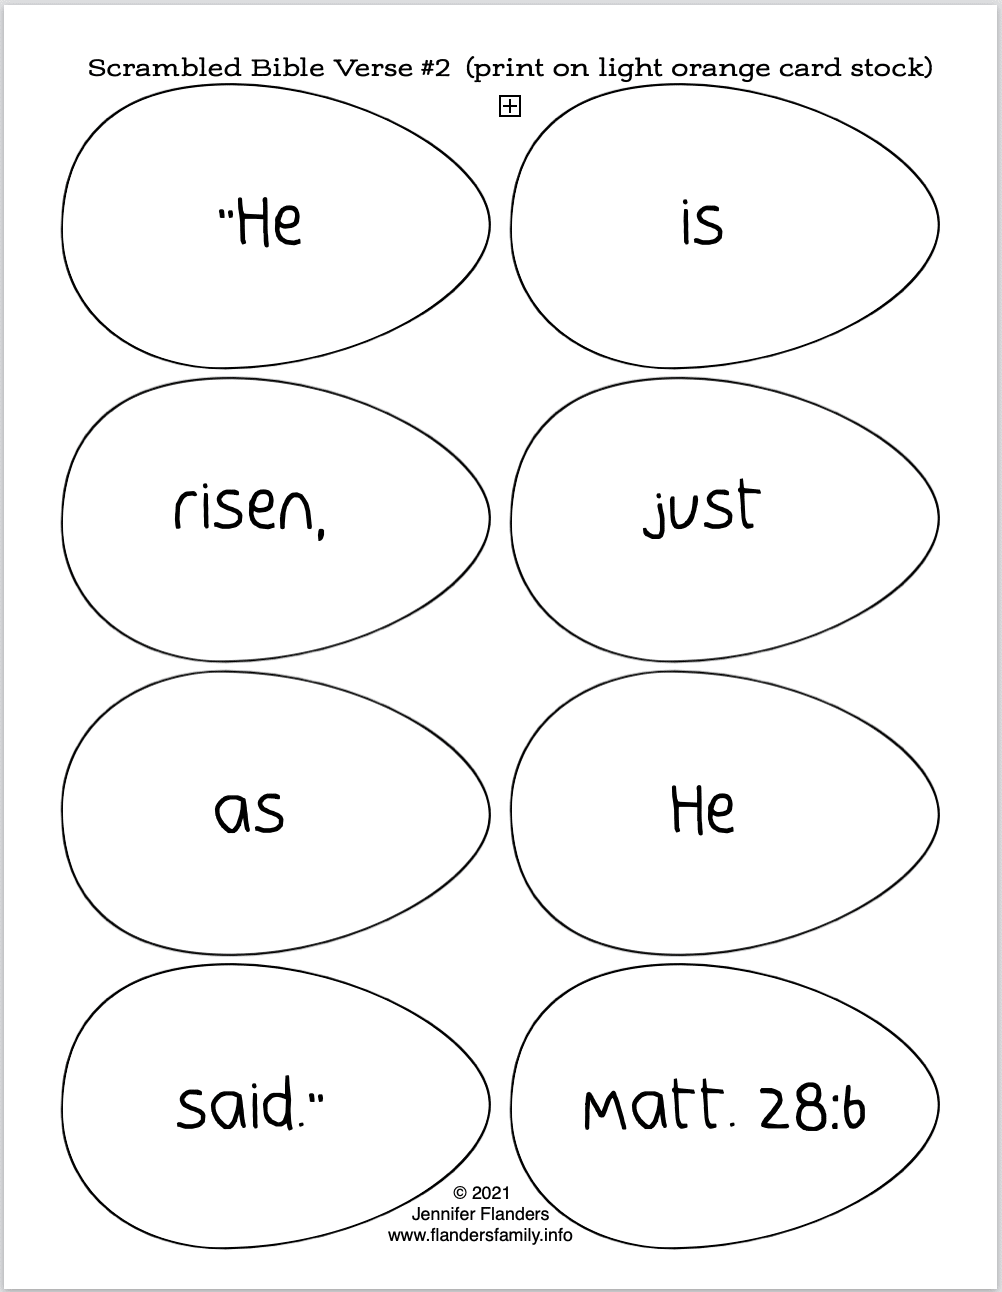 Scrambled Bible Verse Easter Egg Puzzles